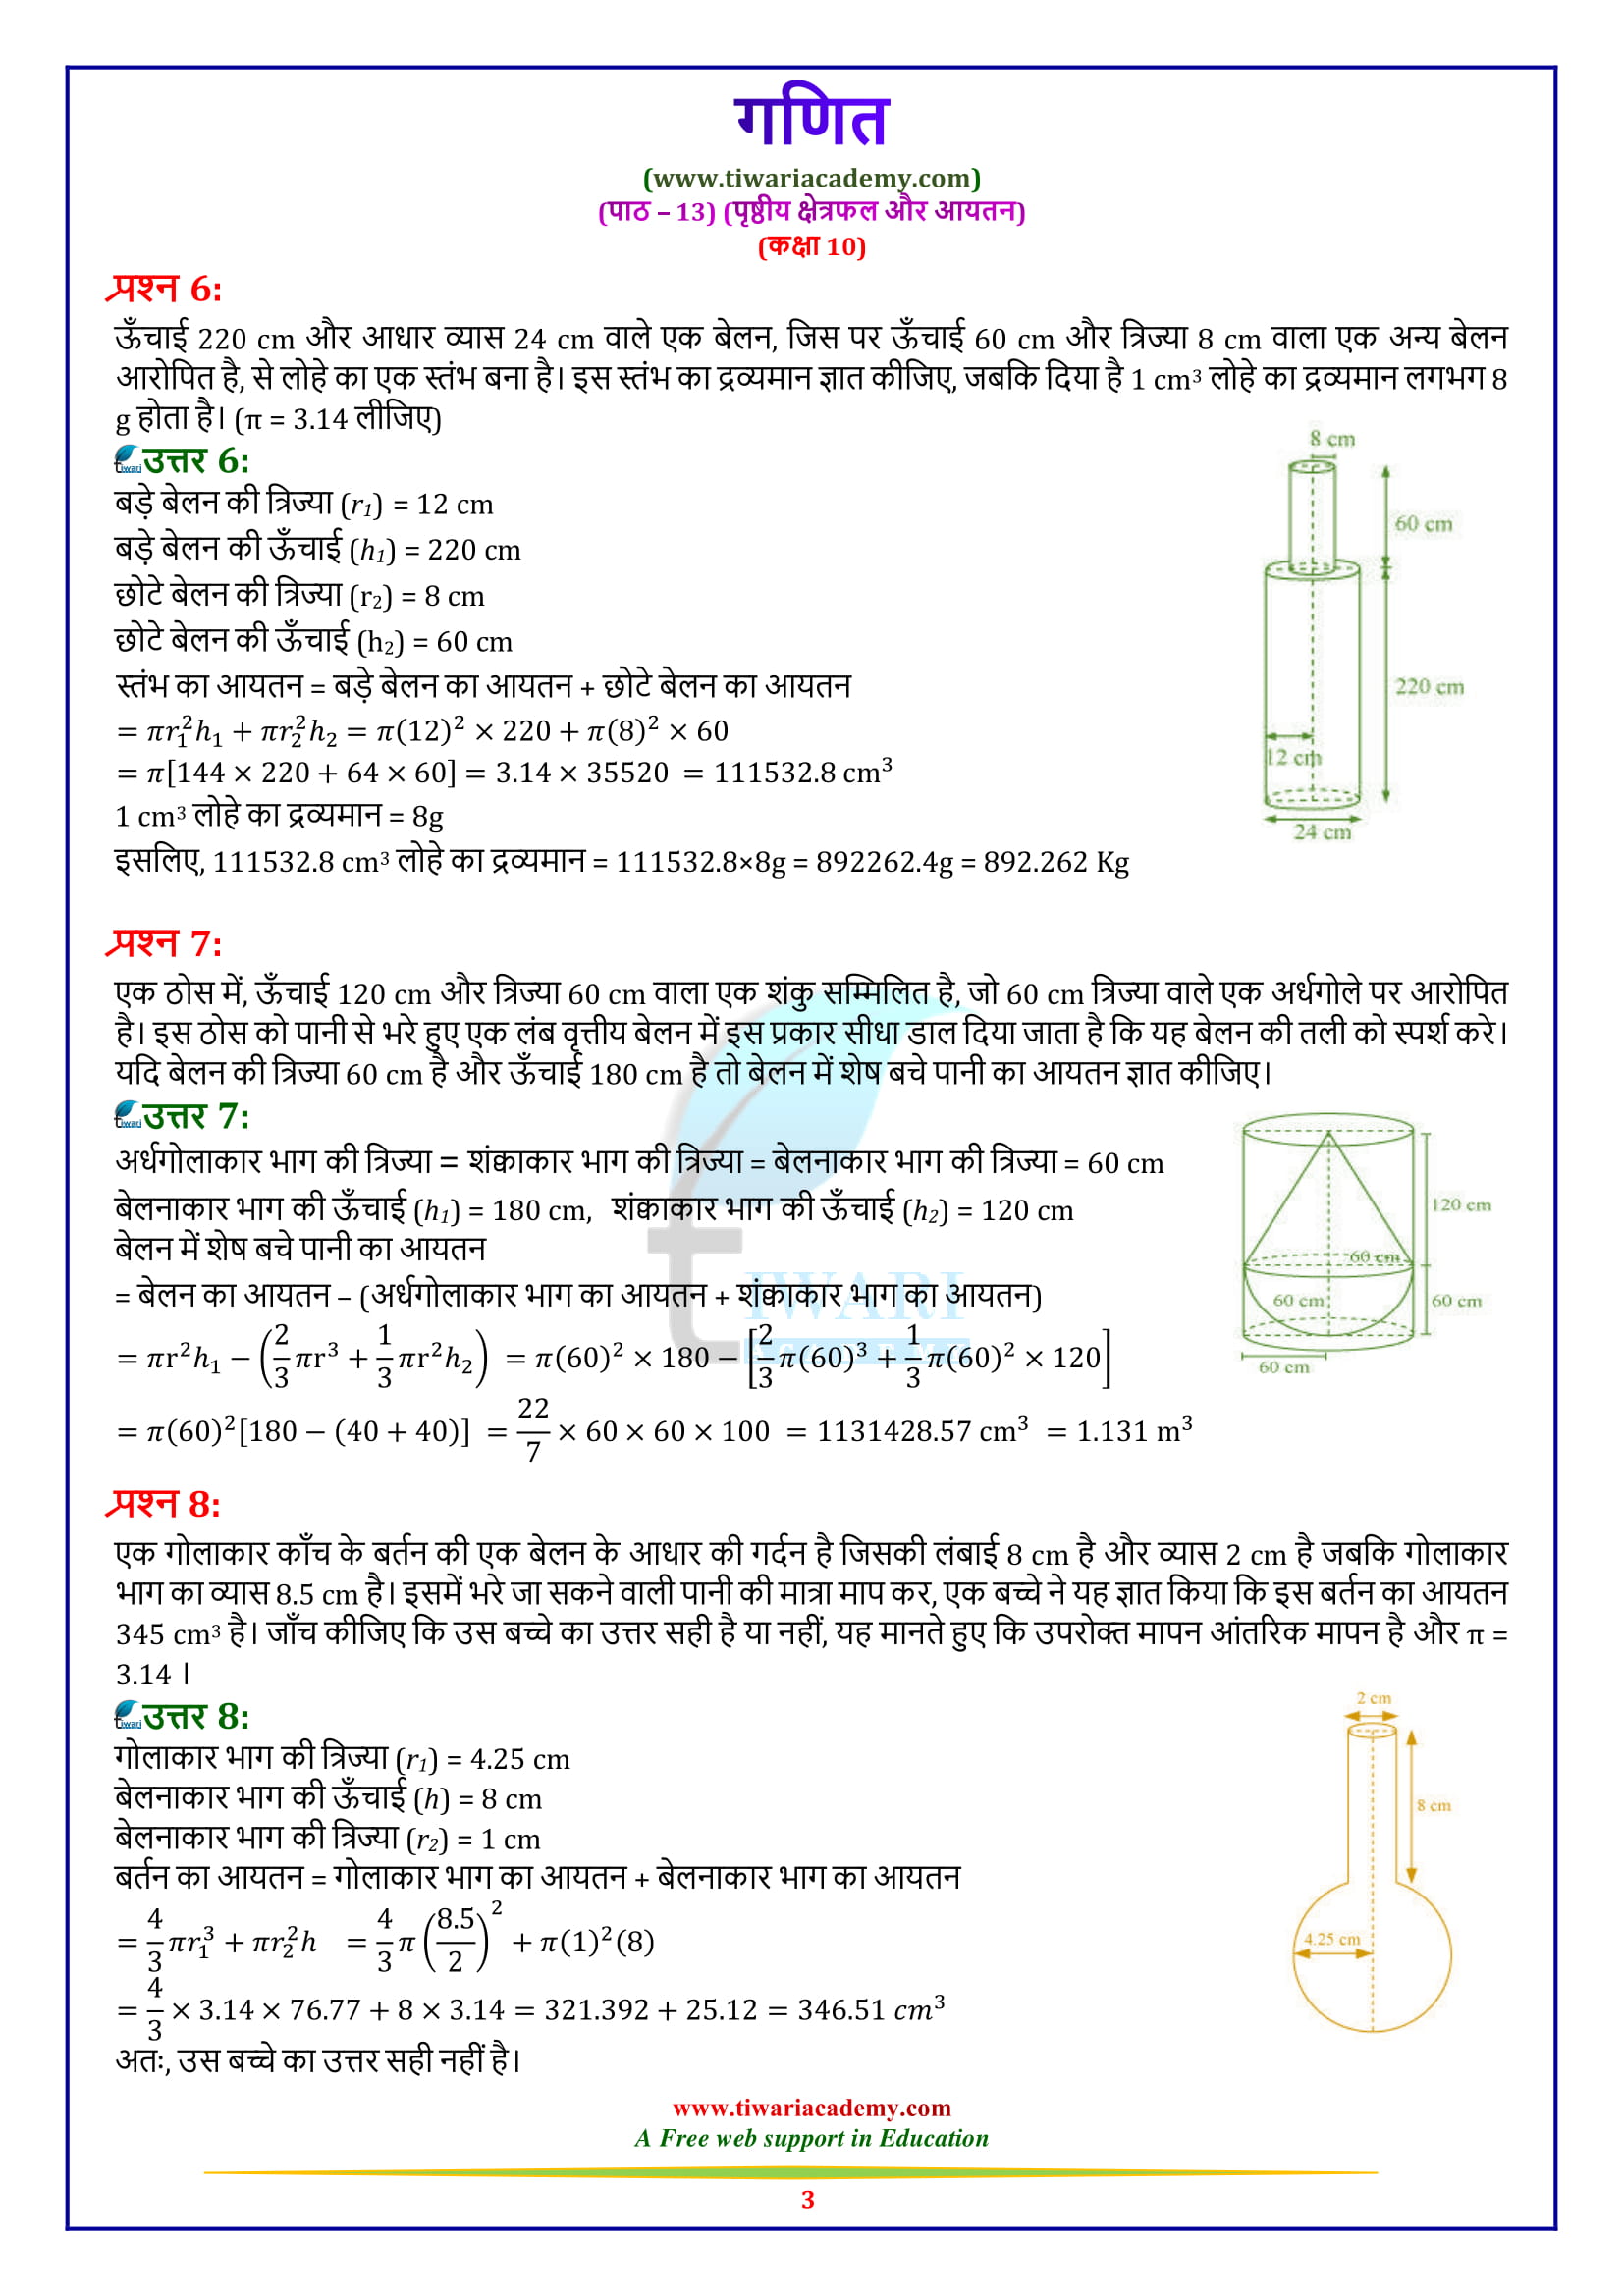 Class 10 Maths Exercise 13.2 solutions for CBSE and UP Board 2018-19 updated.